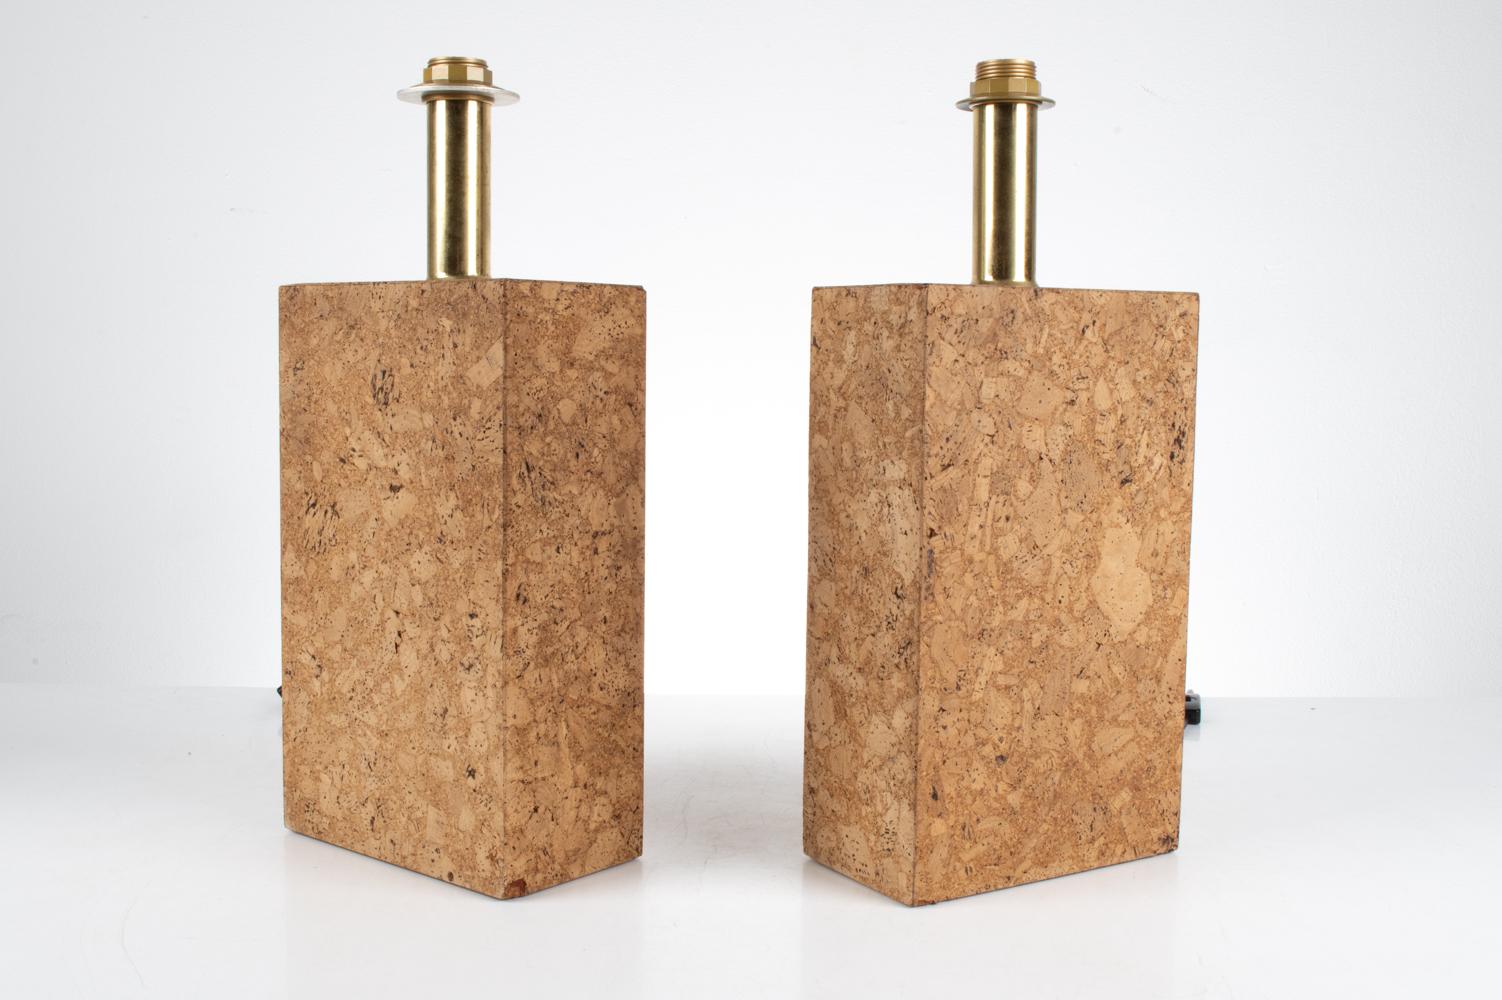 Mid-Century Modern Pair of Cork Monolith Table Lamps in the Stye of Ingo Maurer, c. 1970's For Sale